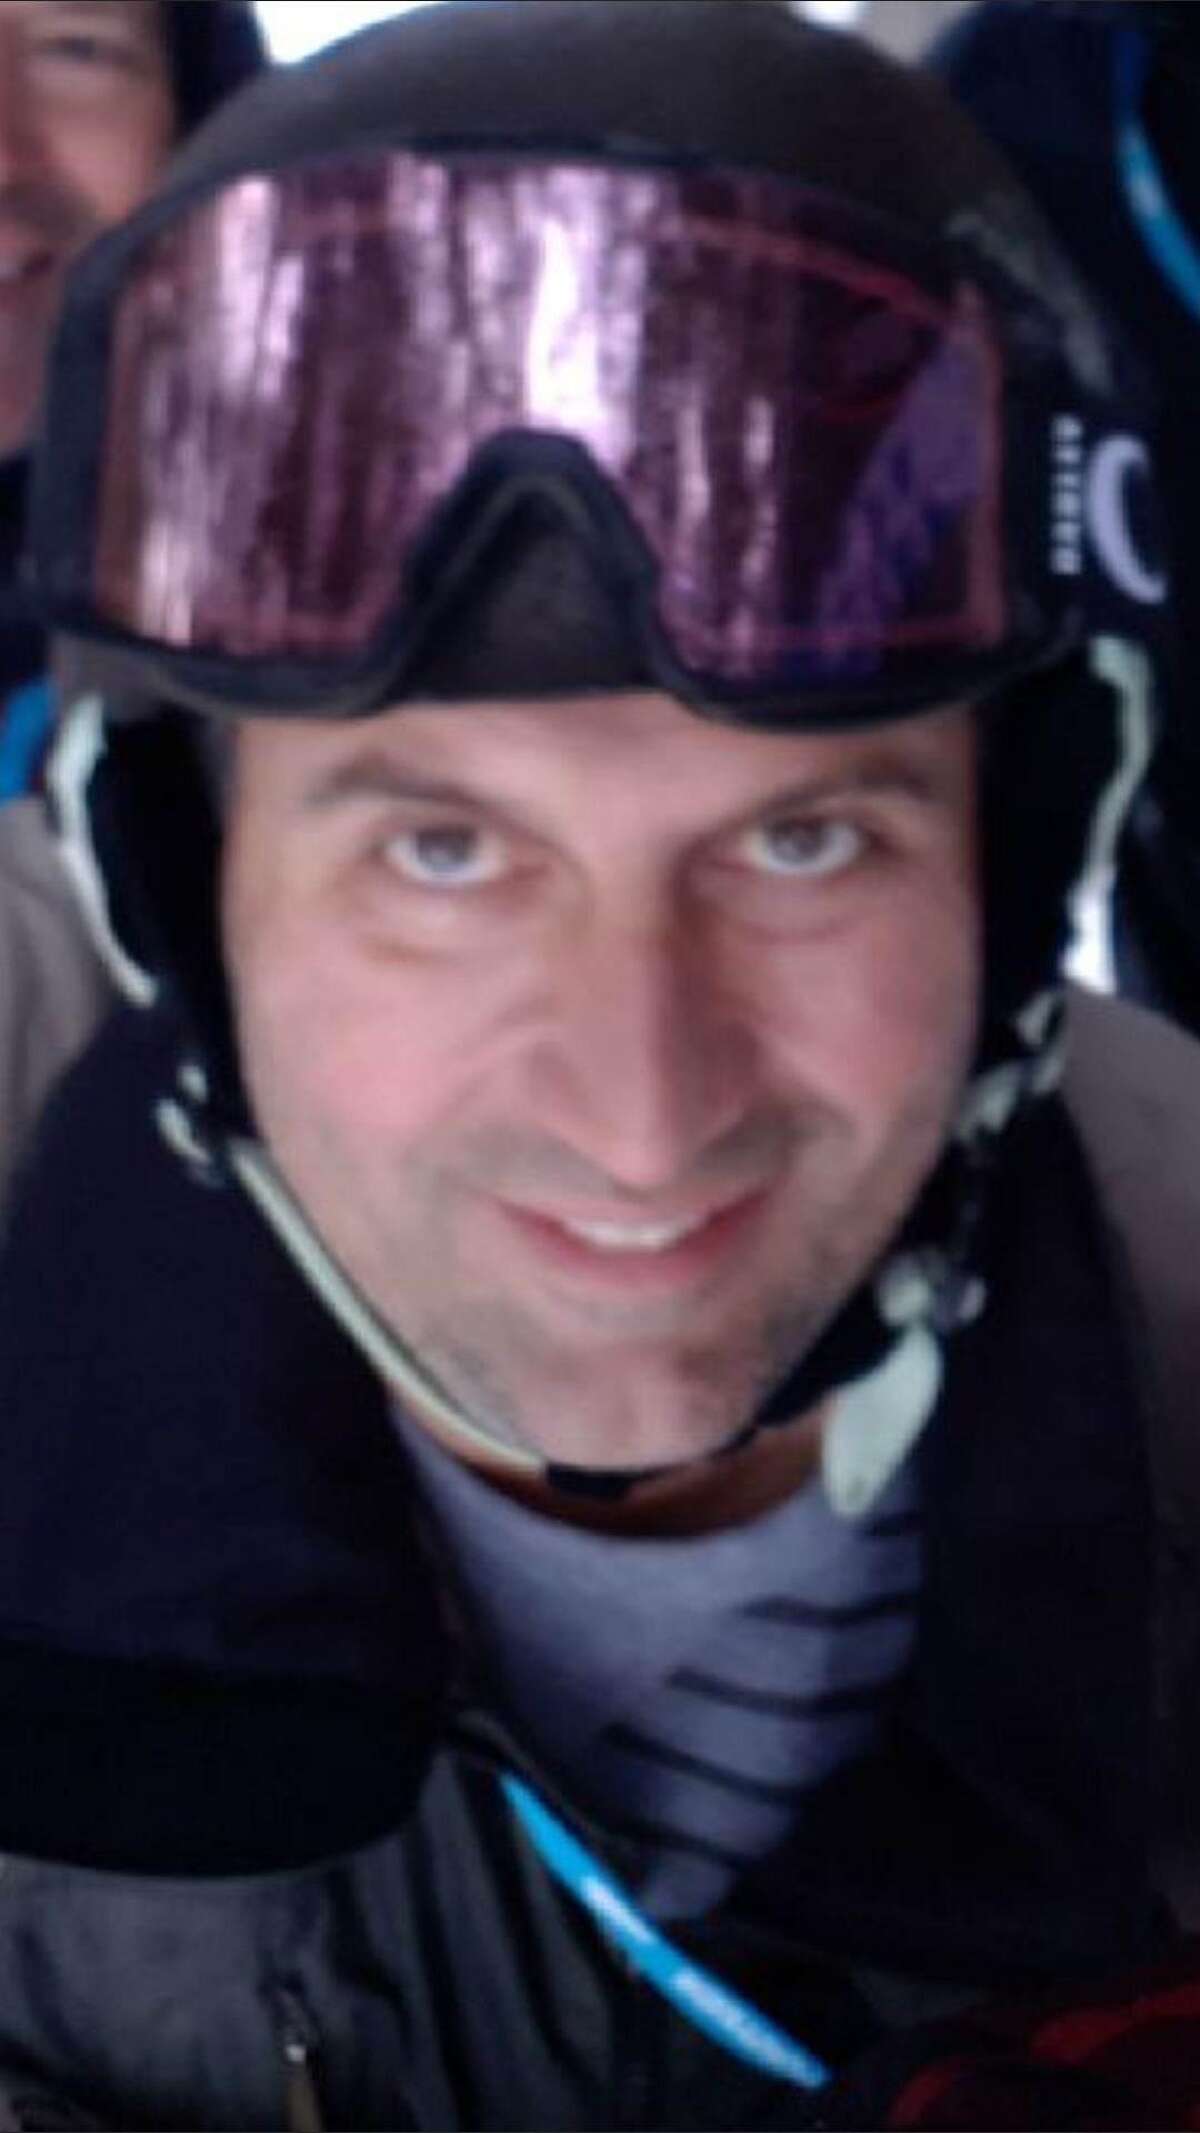 Constantinos "Danny" Filippidis, a 49-year-old firefighter from Toronto, vanished Wednesday at Whiteface Mountain where he was with friends. He reappeared six days later in Sacramento, Calif., and told investigators he didn't know how he got there.